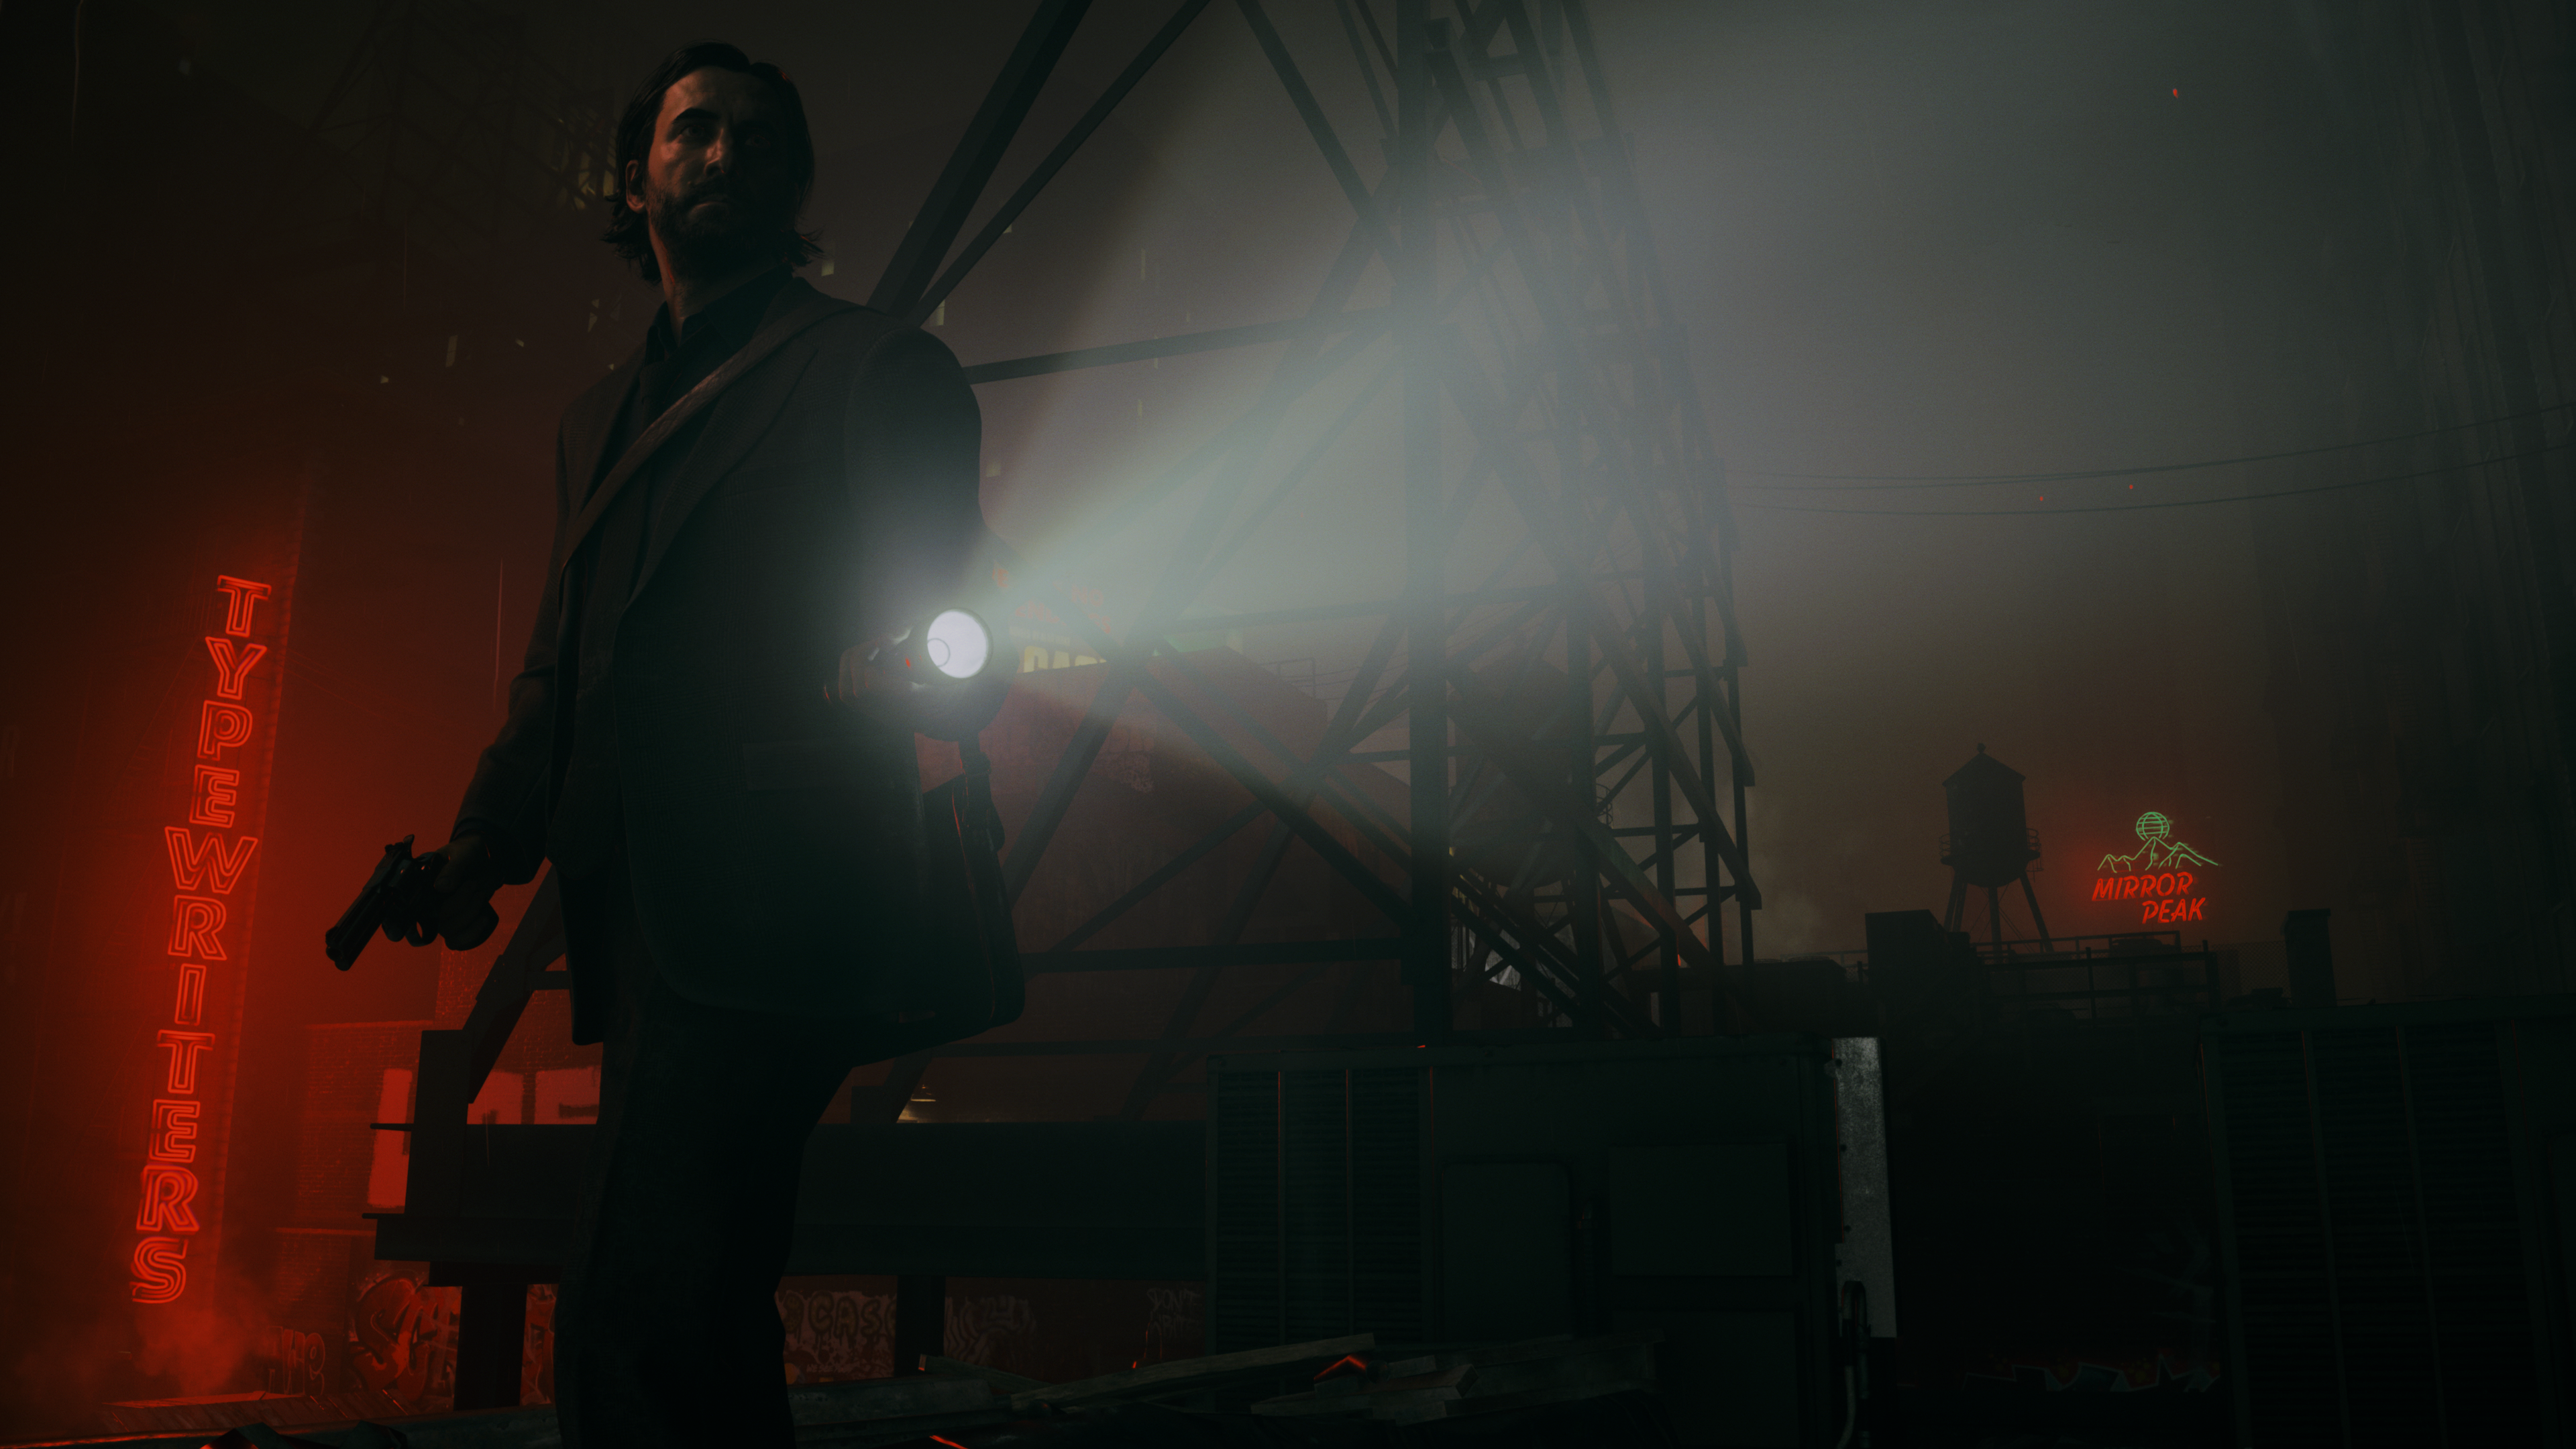 Alan Wake 2 release date, launch times and PC requirements